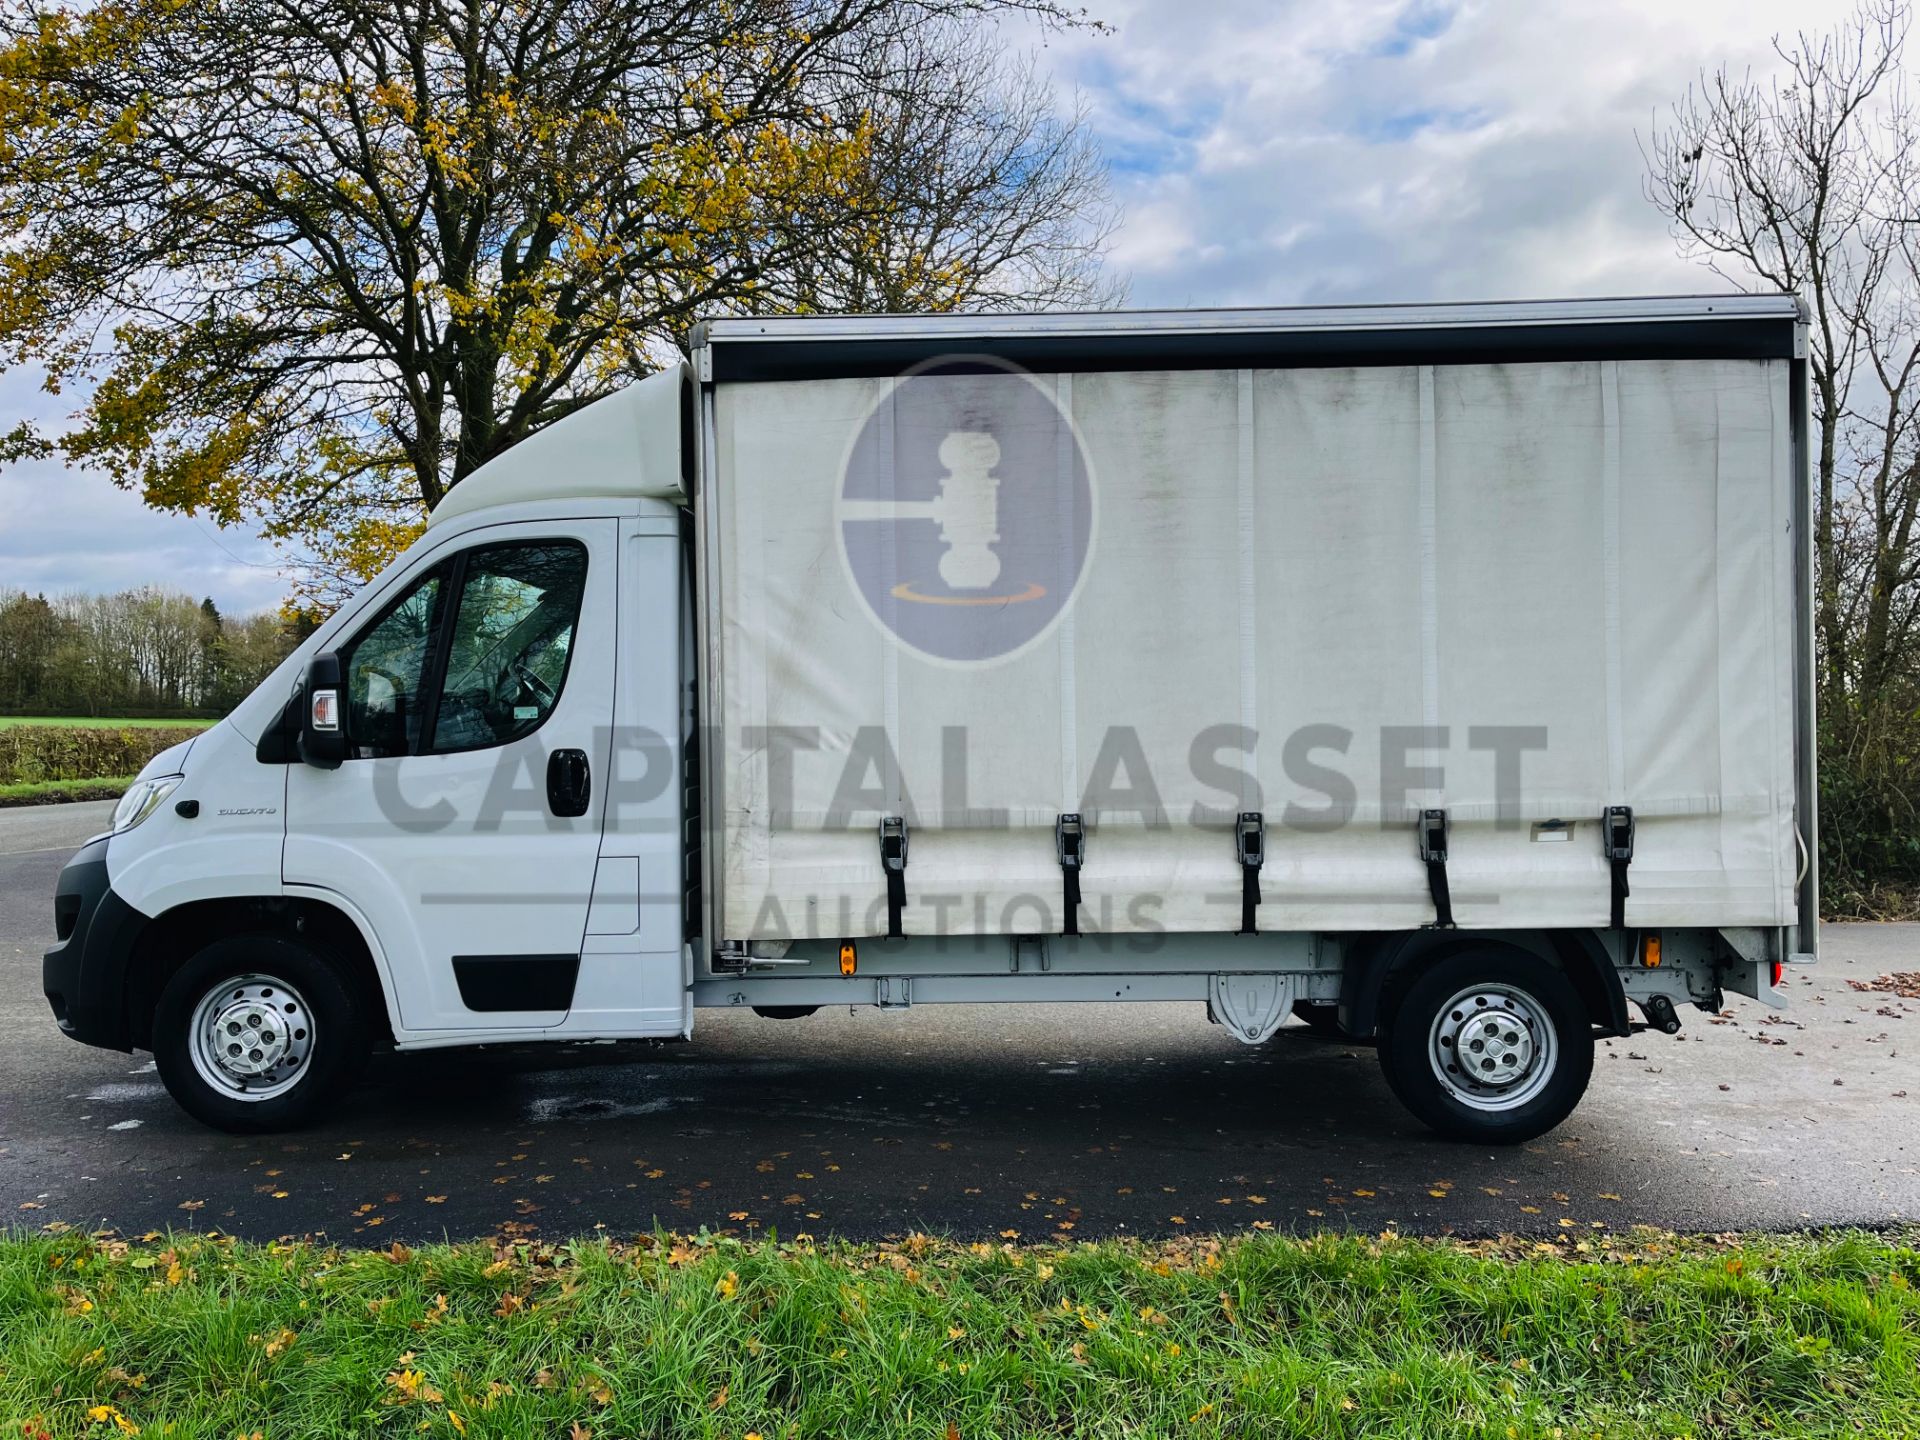 (ON SALE) FIAT DUCATO 2.3 MULTIJET (2019 MODEL) RARE CURTAIN SIDE BODY - 1 OWNER - 360 CAMERA VIEW - Image 8 of 24